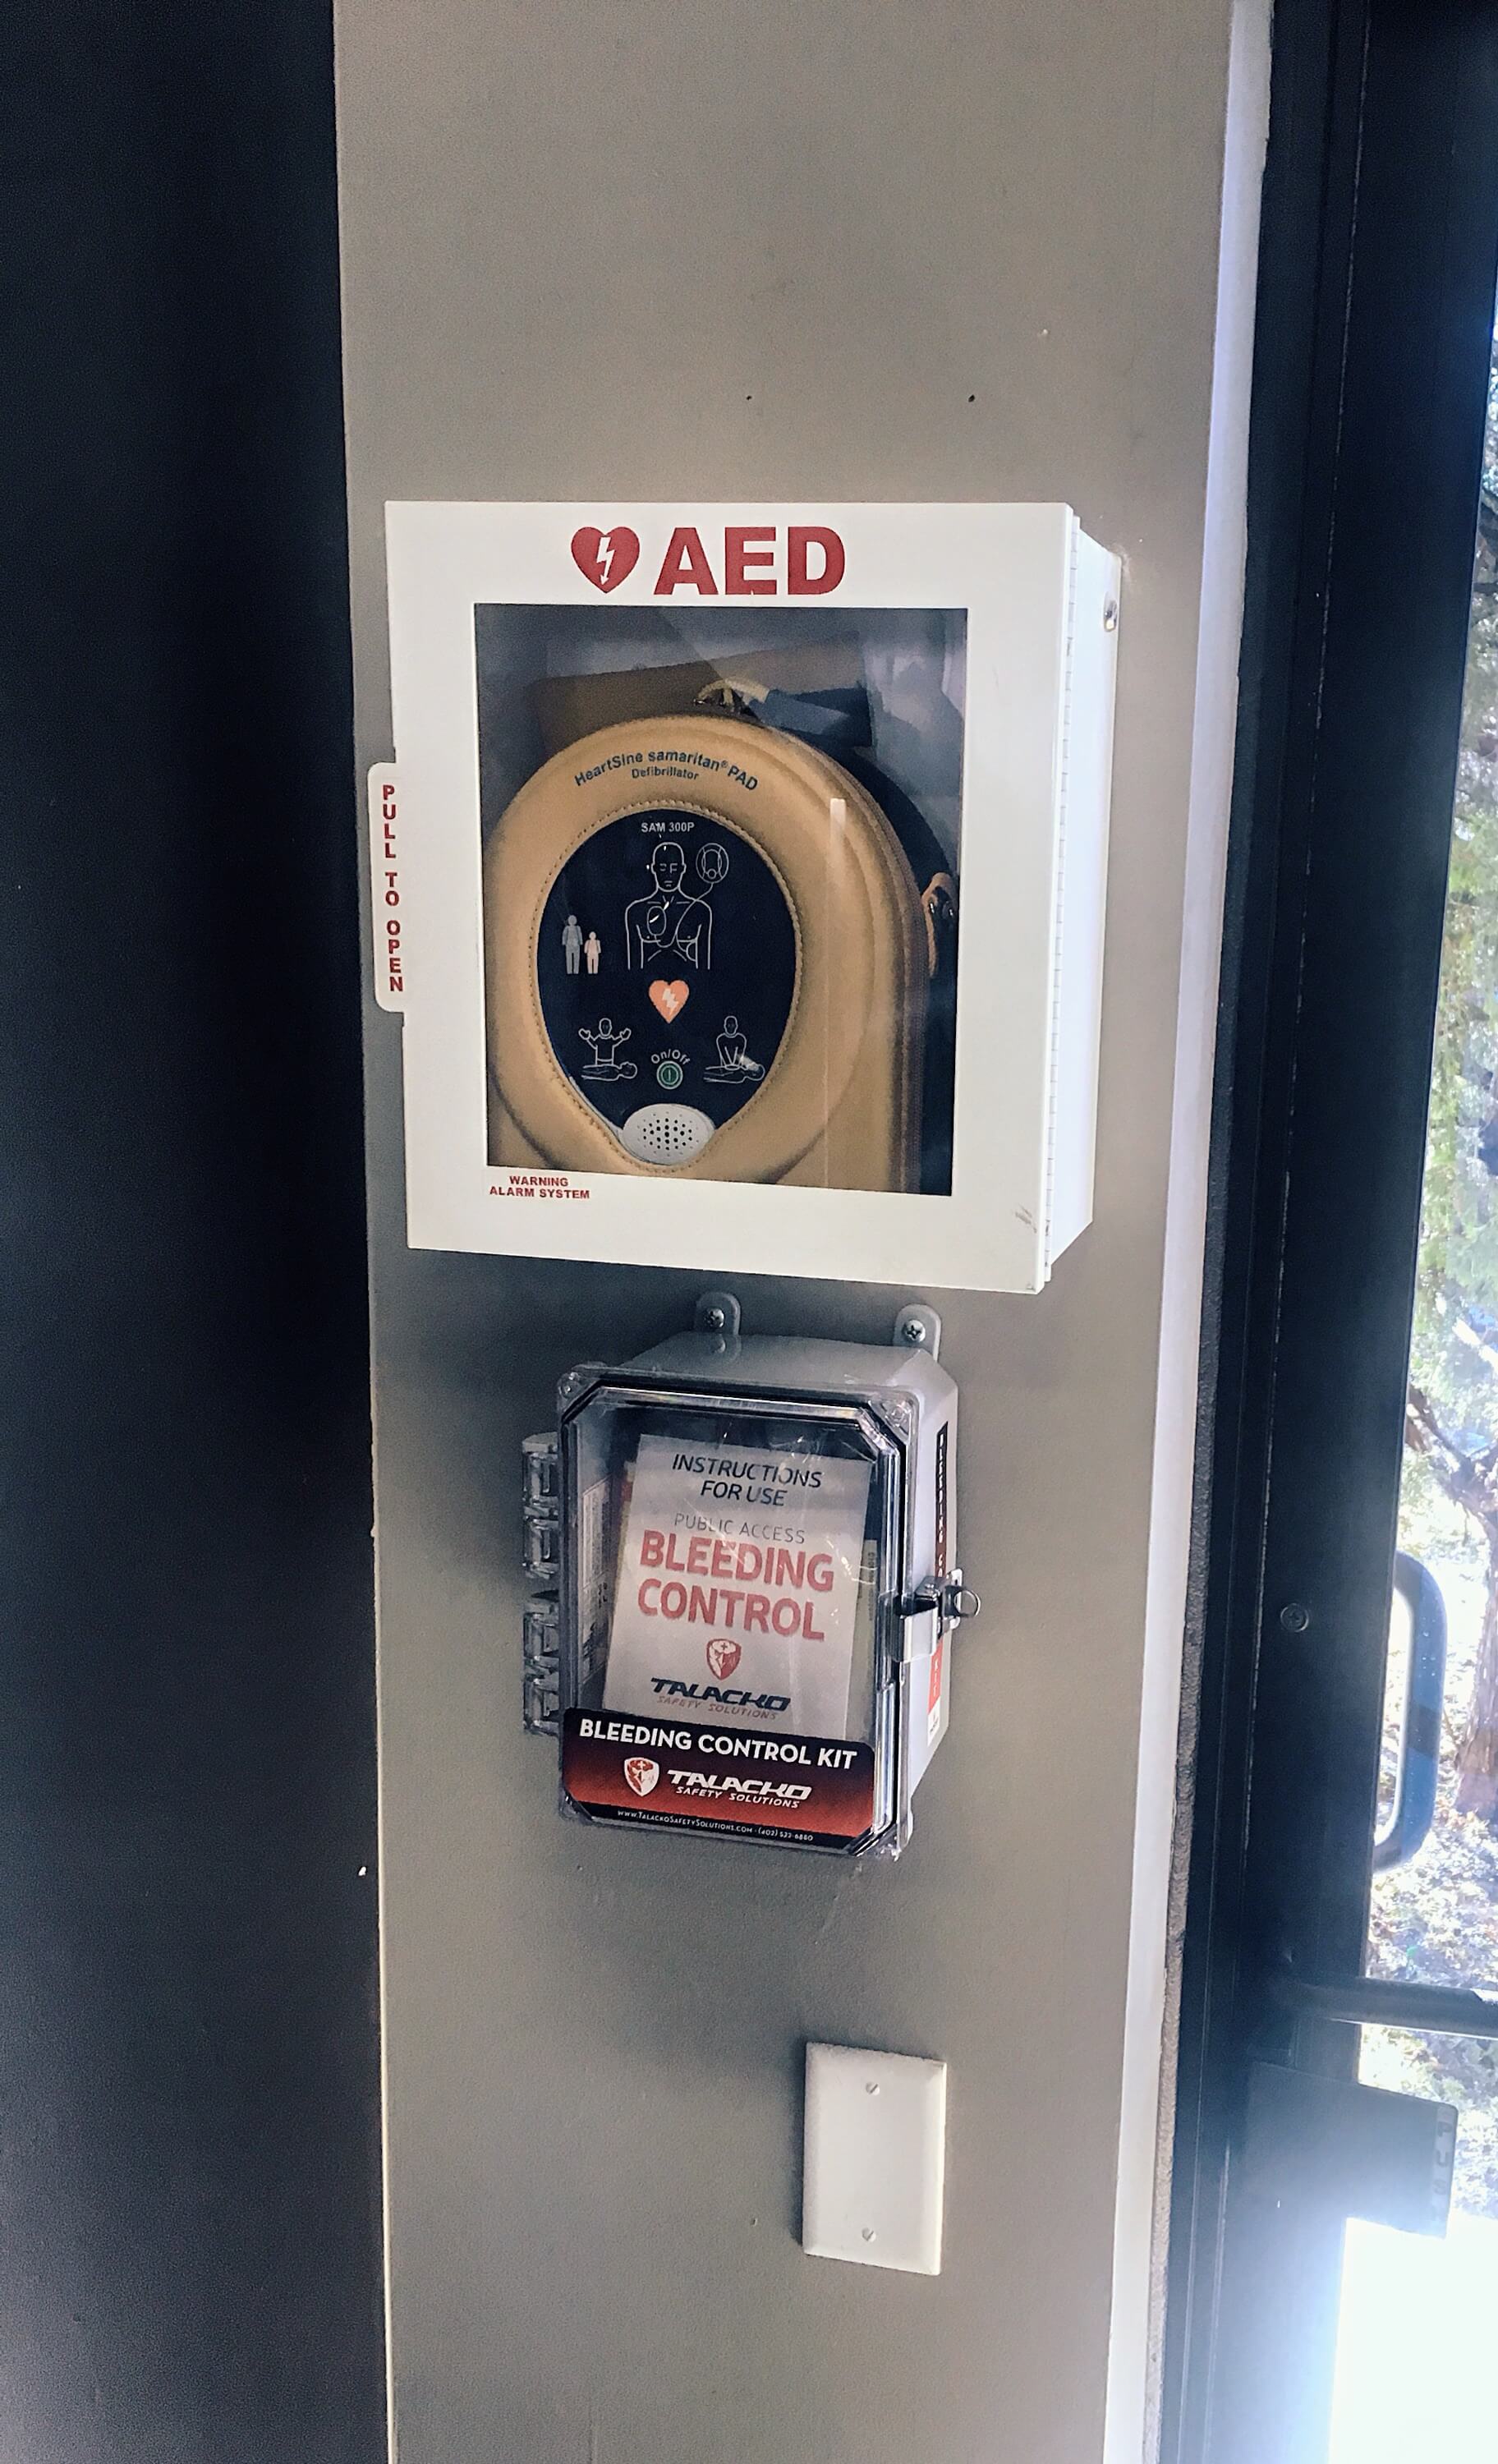 Public access bleeding control kits are often placed next to AED's in public facilities.